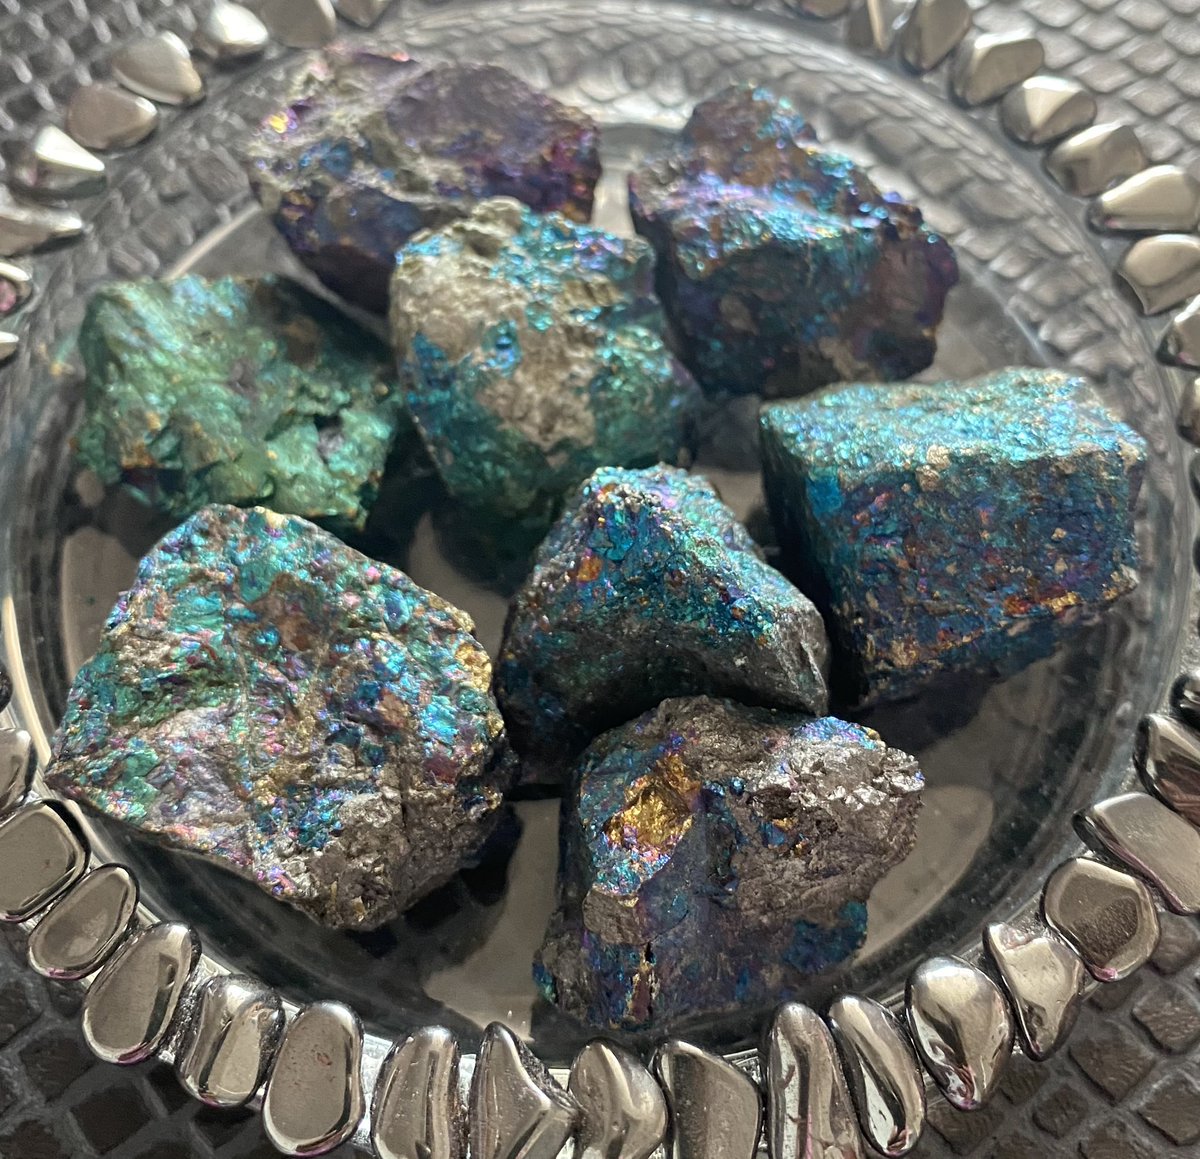 Peacock Ore ($8) is one of the most powerful stones when used in conjunction with chakra healing as it's energy is such that when placed on one chakra it effects all the others. Available for purchase at https://t.co/SdzrUo5onm. https://t.co/pREtk3YrIe